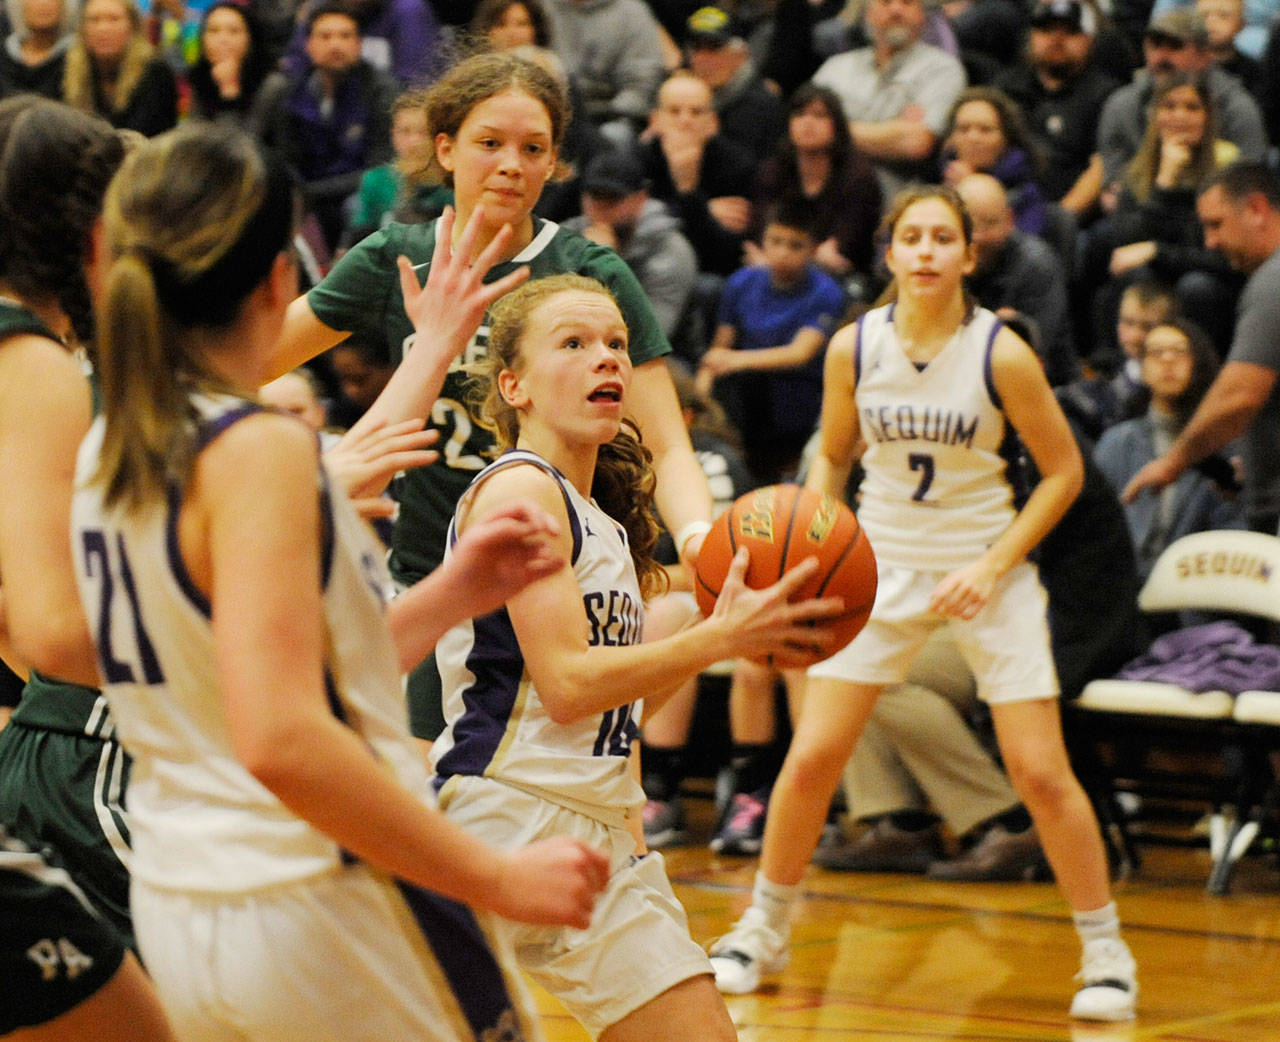 Girls basketball: Wolves fall to PA and Olympic, take third seed to districts